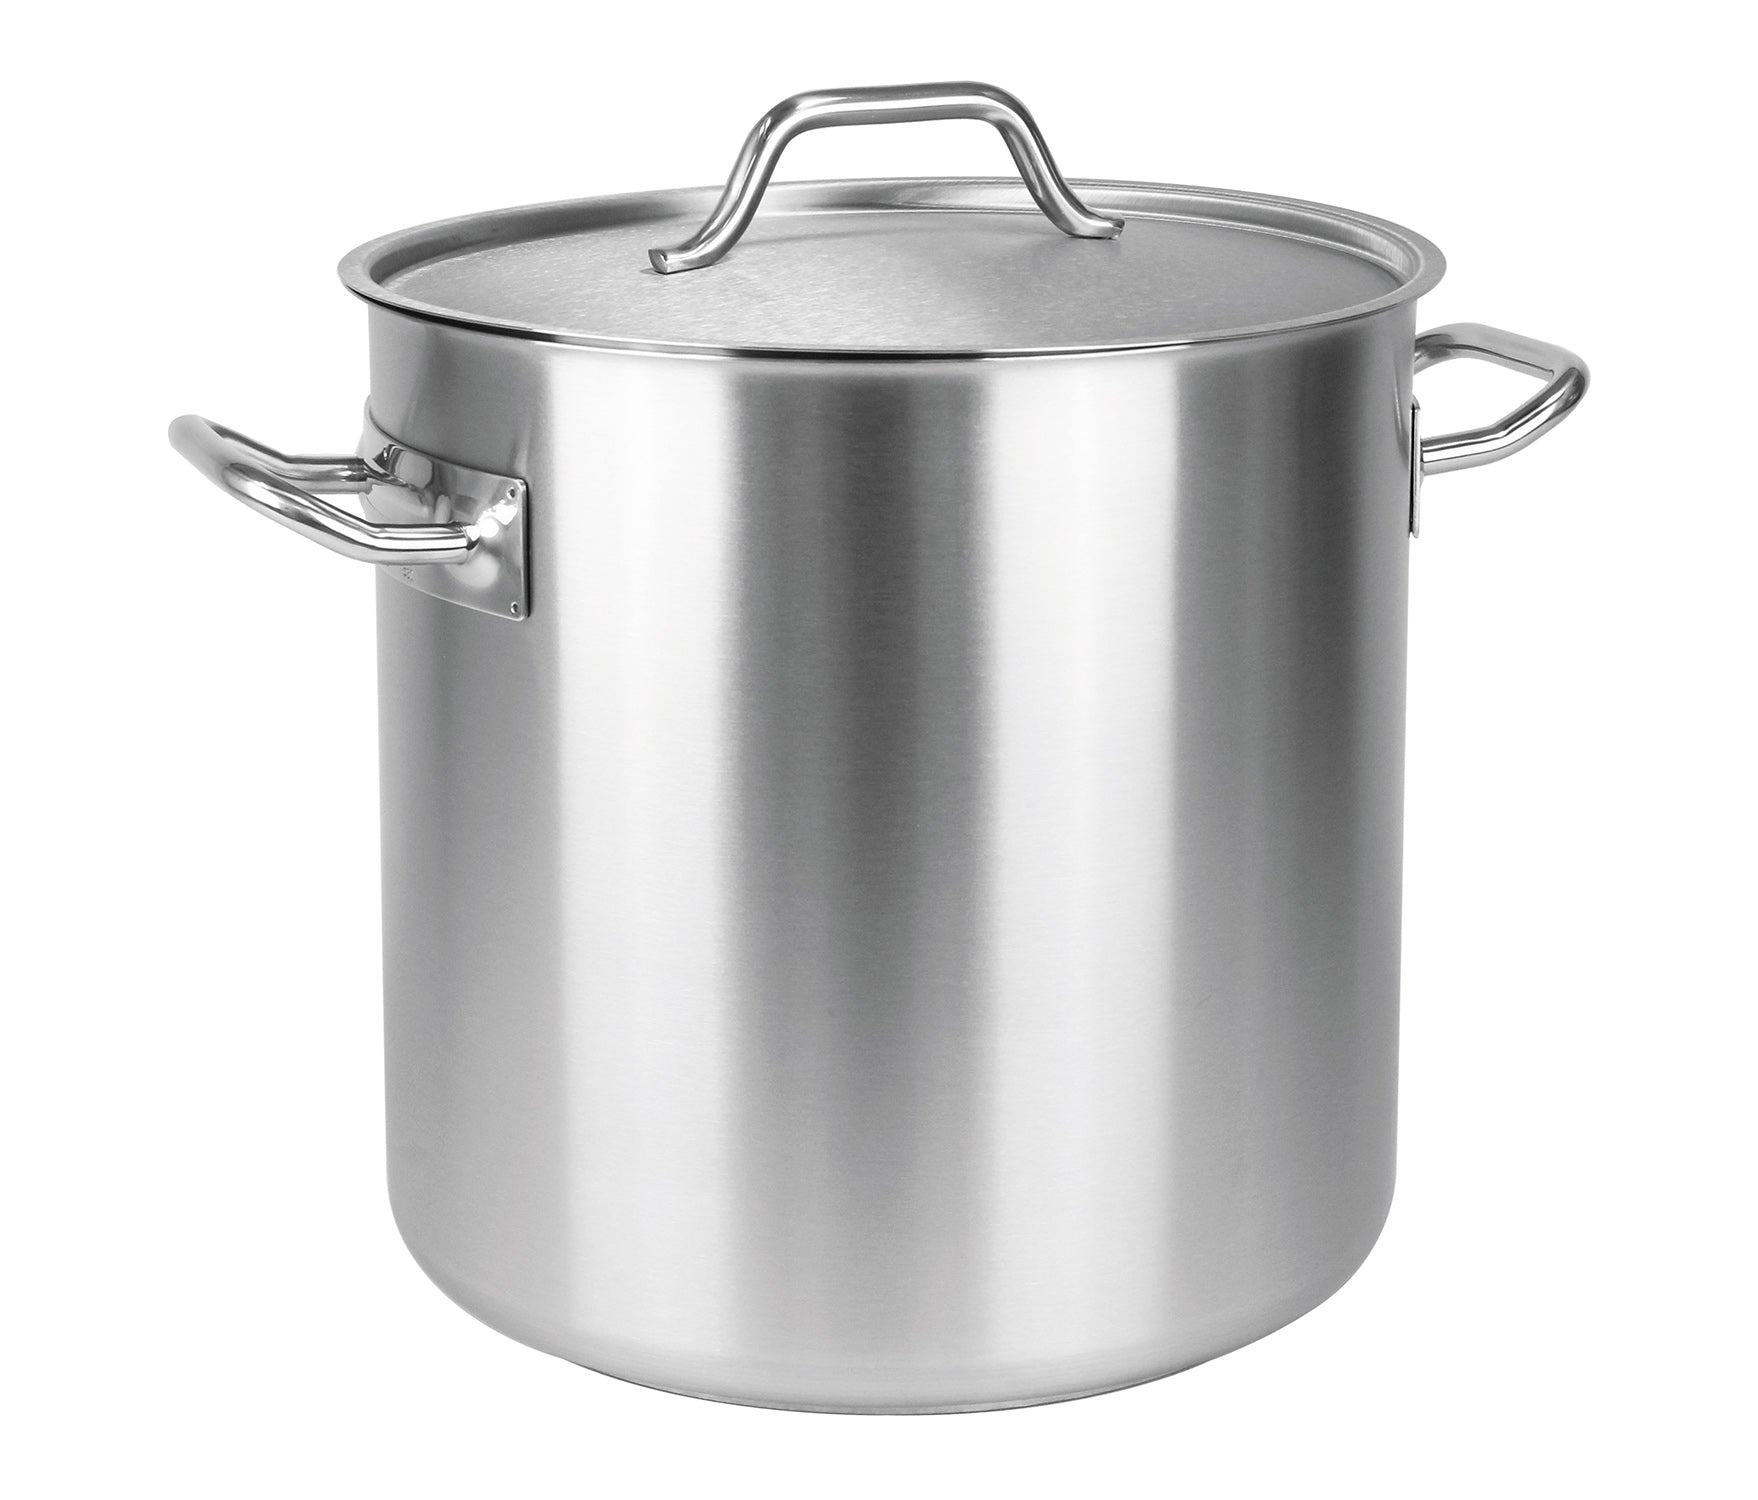 Large Stockpot - Extras Collection – CRISTEL USA